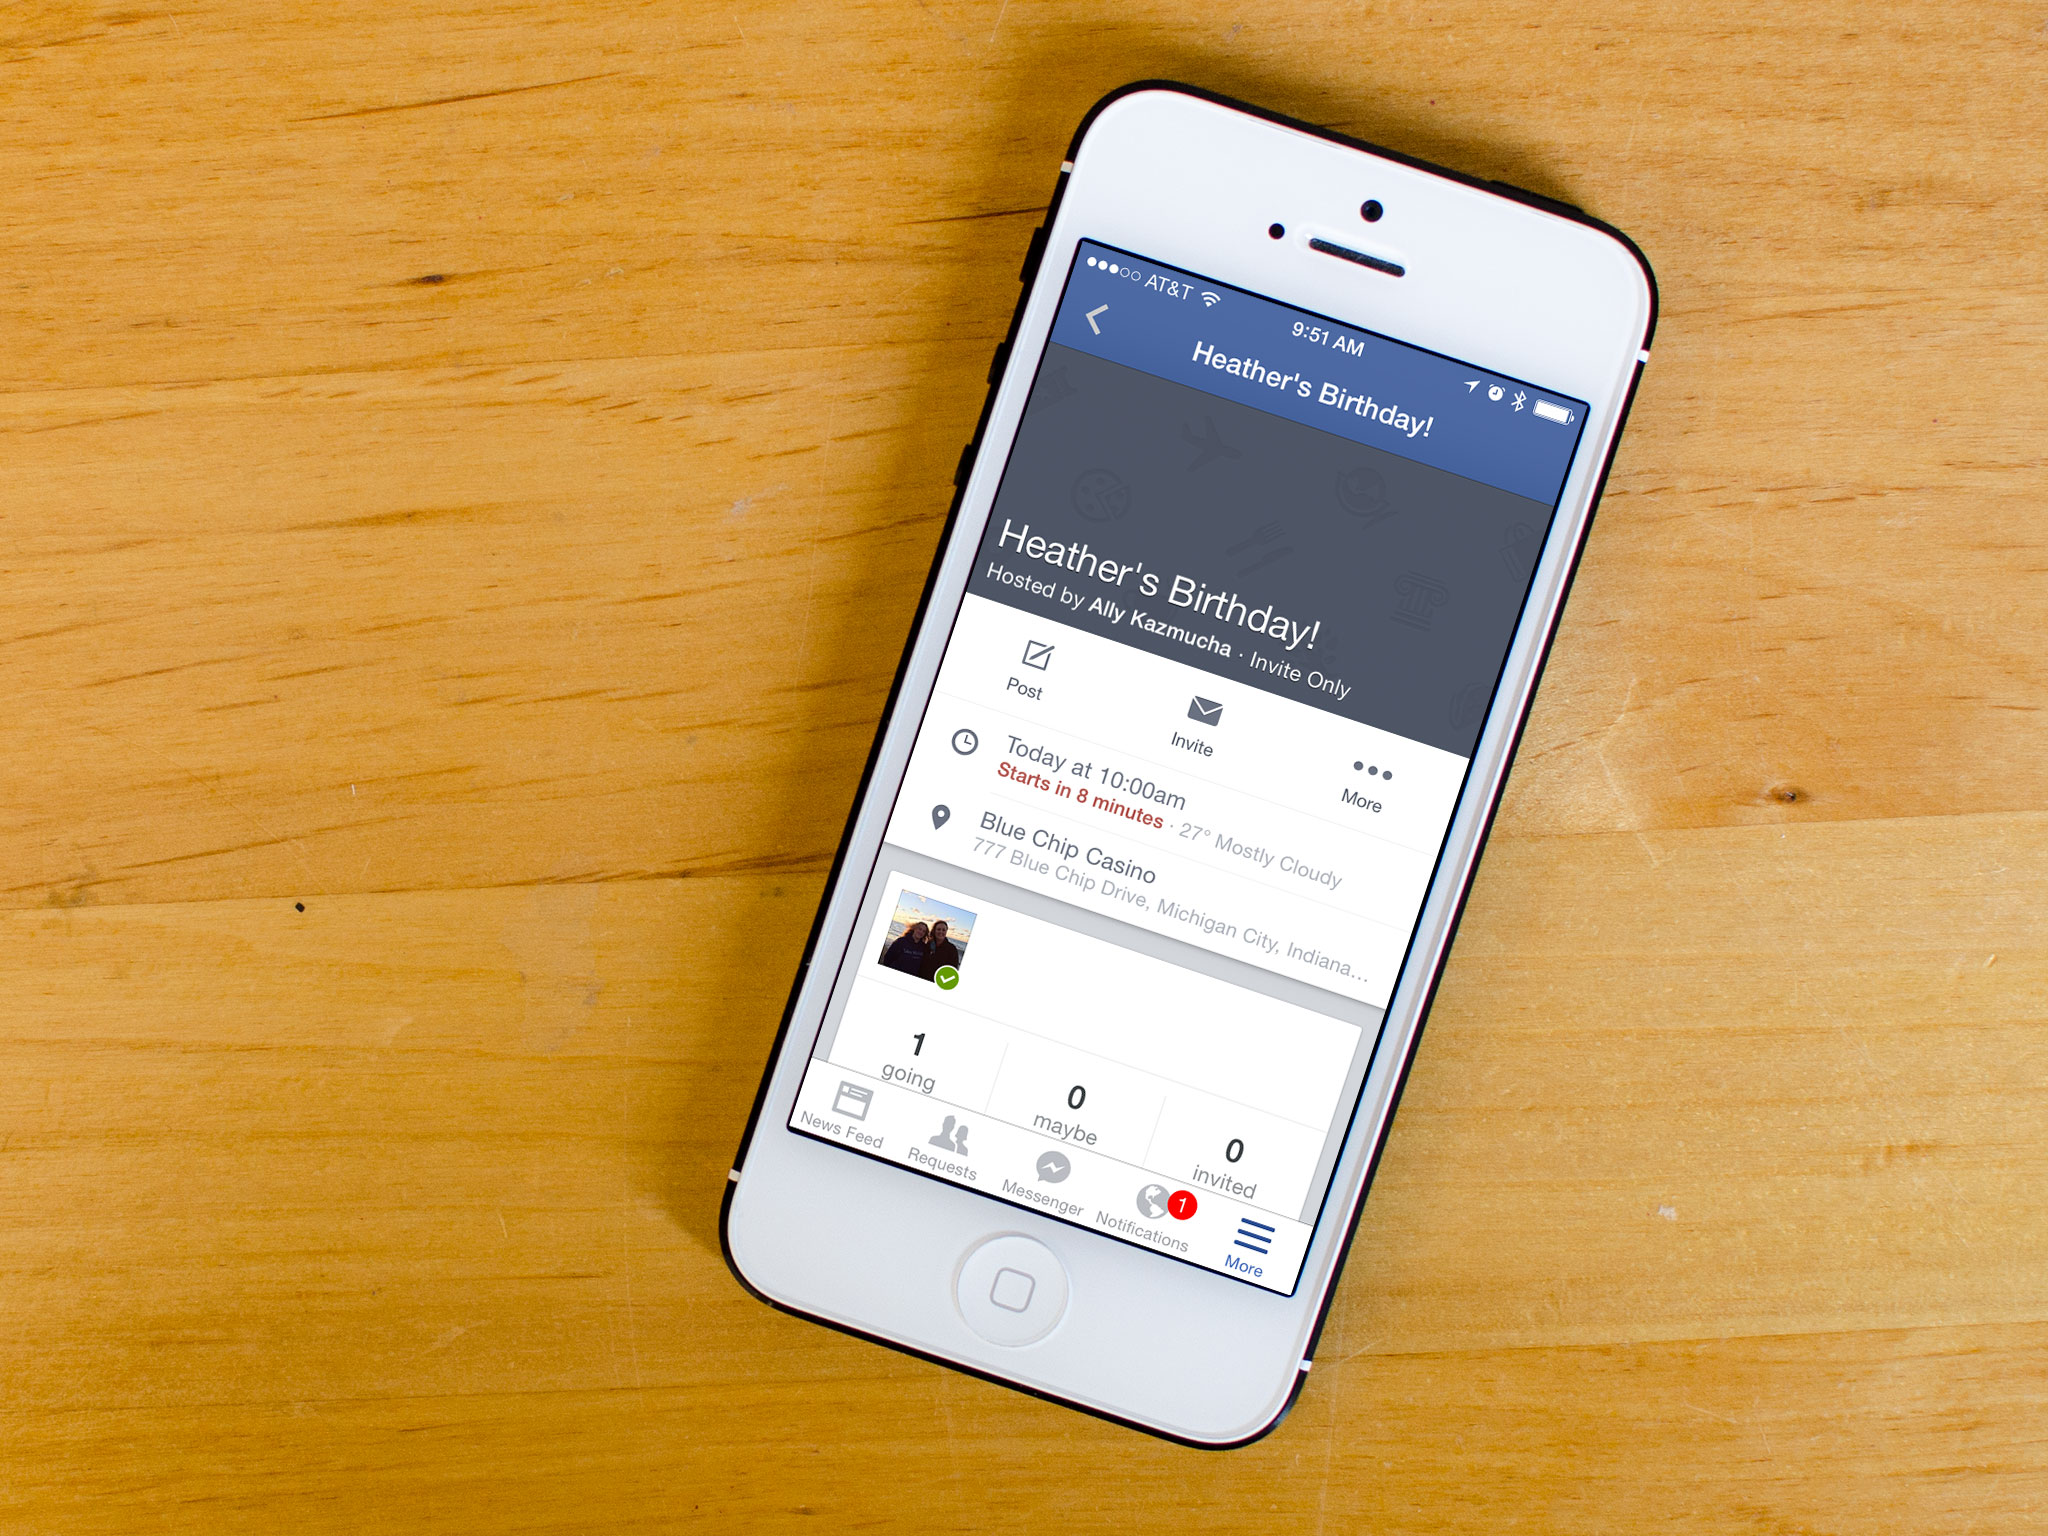 How to create a Facebook event on your iPhone or iPad 